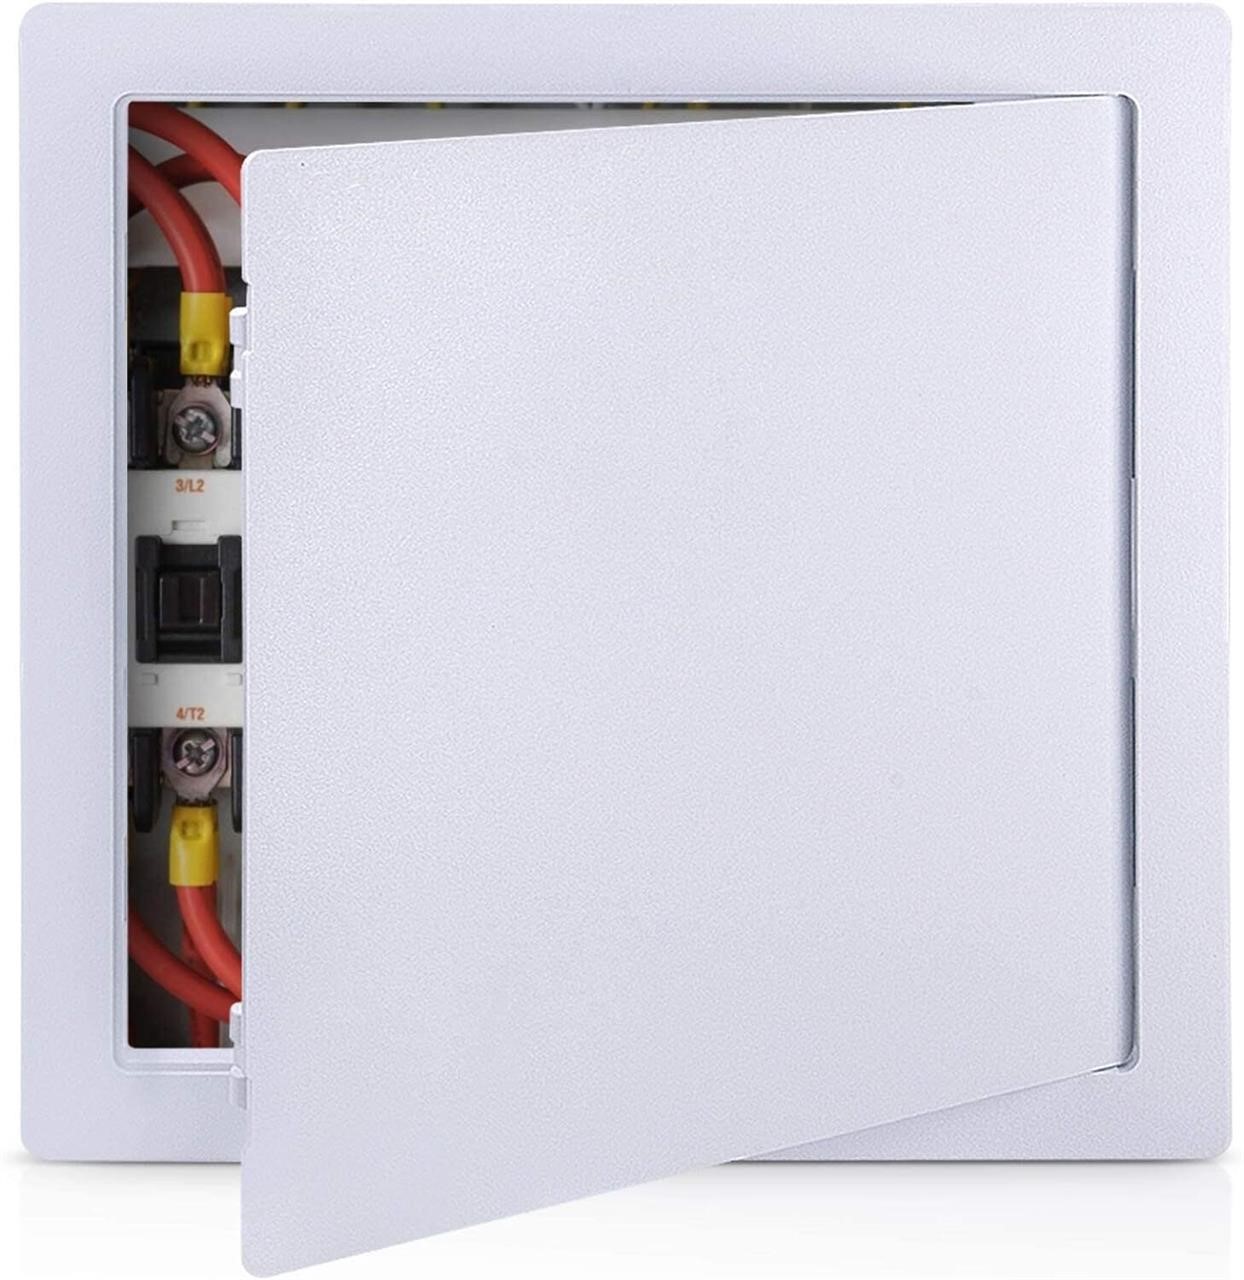 14 x 14 Inch Plumbing Access Panel  White 2 pack